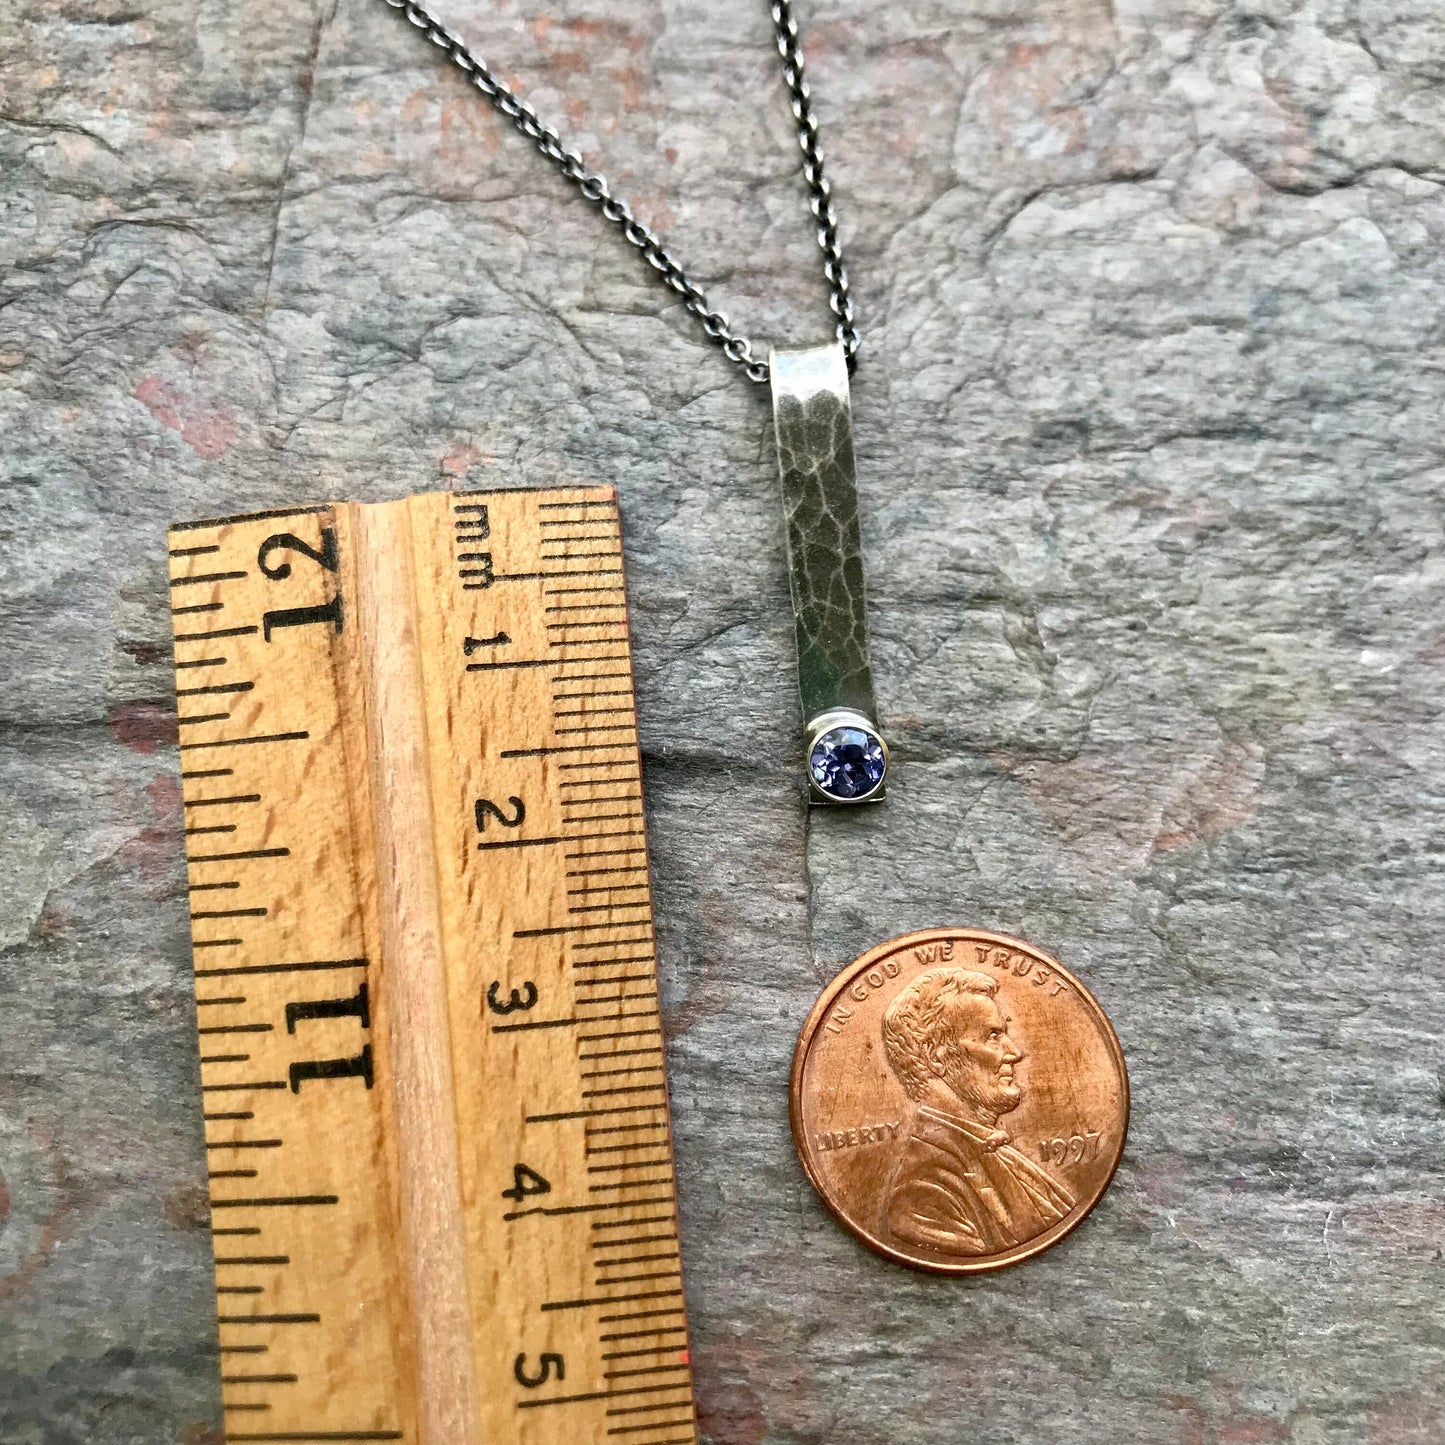 Iolite and Sterling Silver Bar Necklace - Handmade Hammered Sterling Silver Pendant and Genuine Iolite Faceted Gemstone